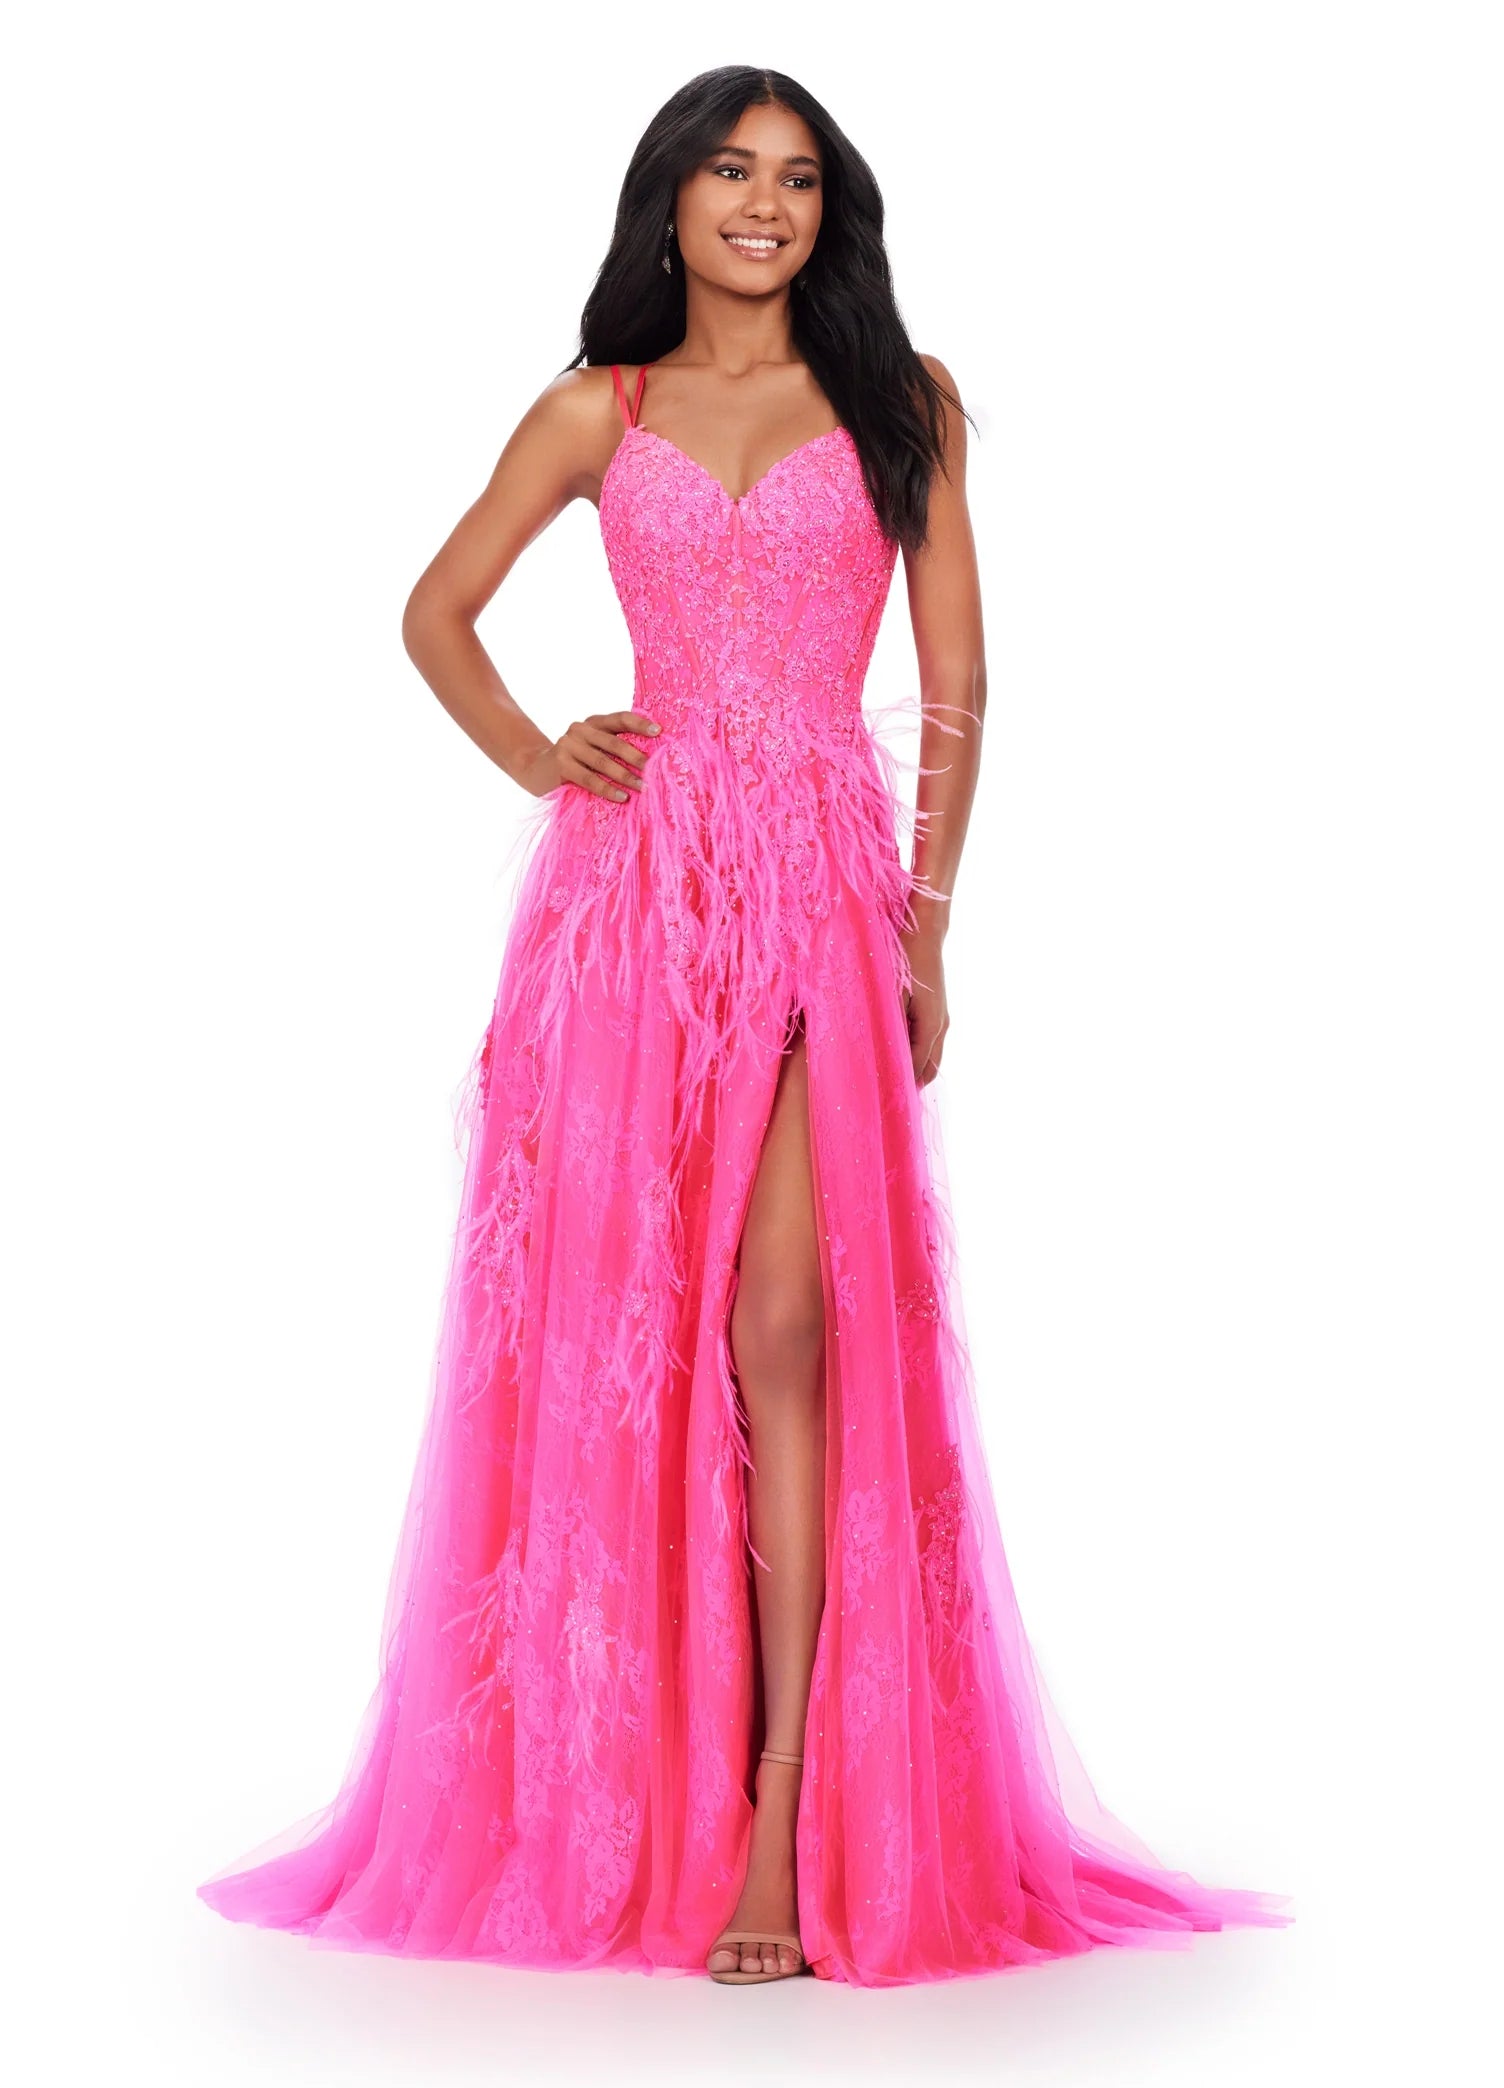 Ashley Lauren 11480 Size 10 Hot Pink Lace Feather A Line Slit Prom